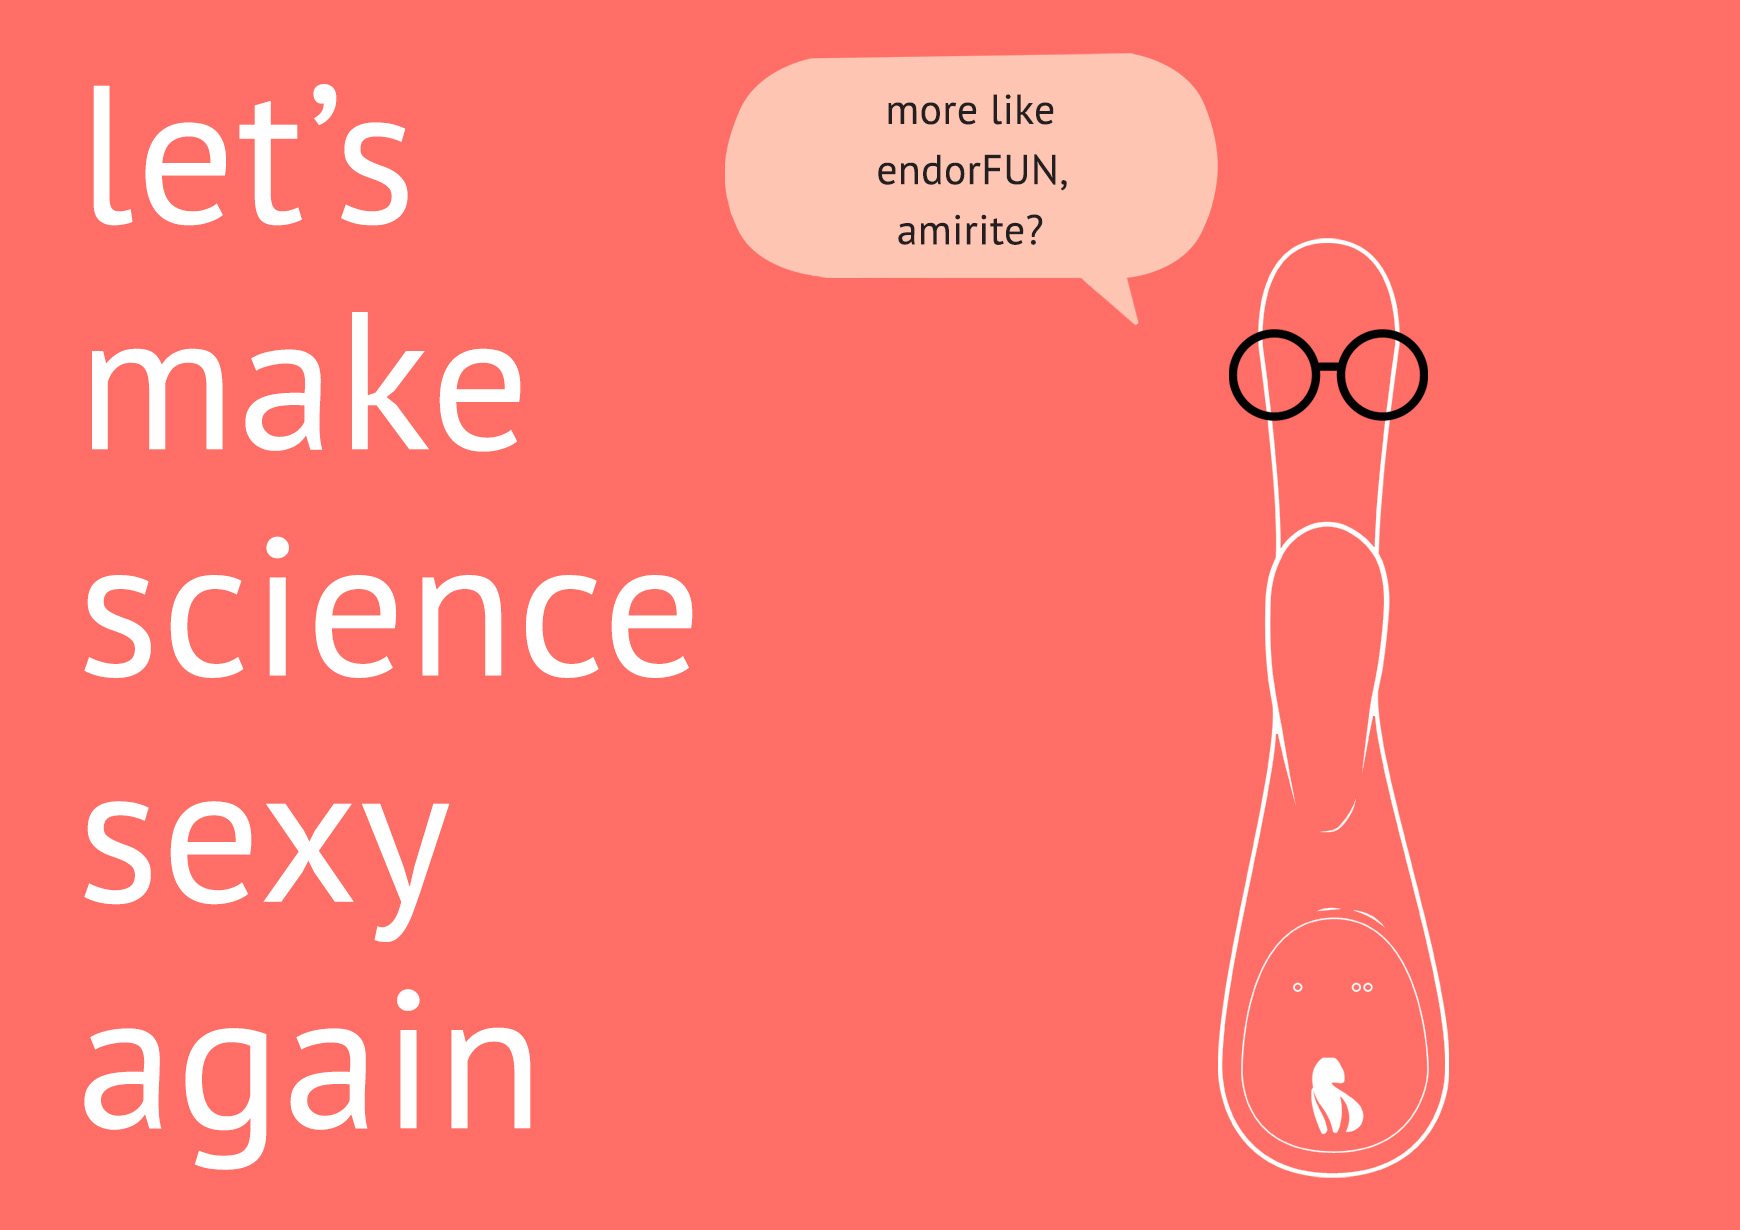 let's make science sexy again